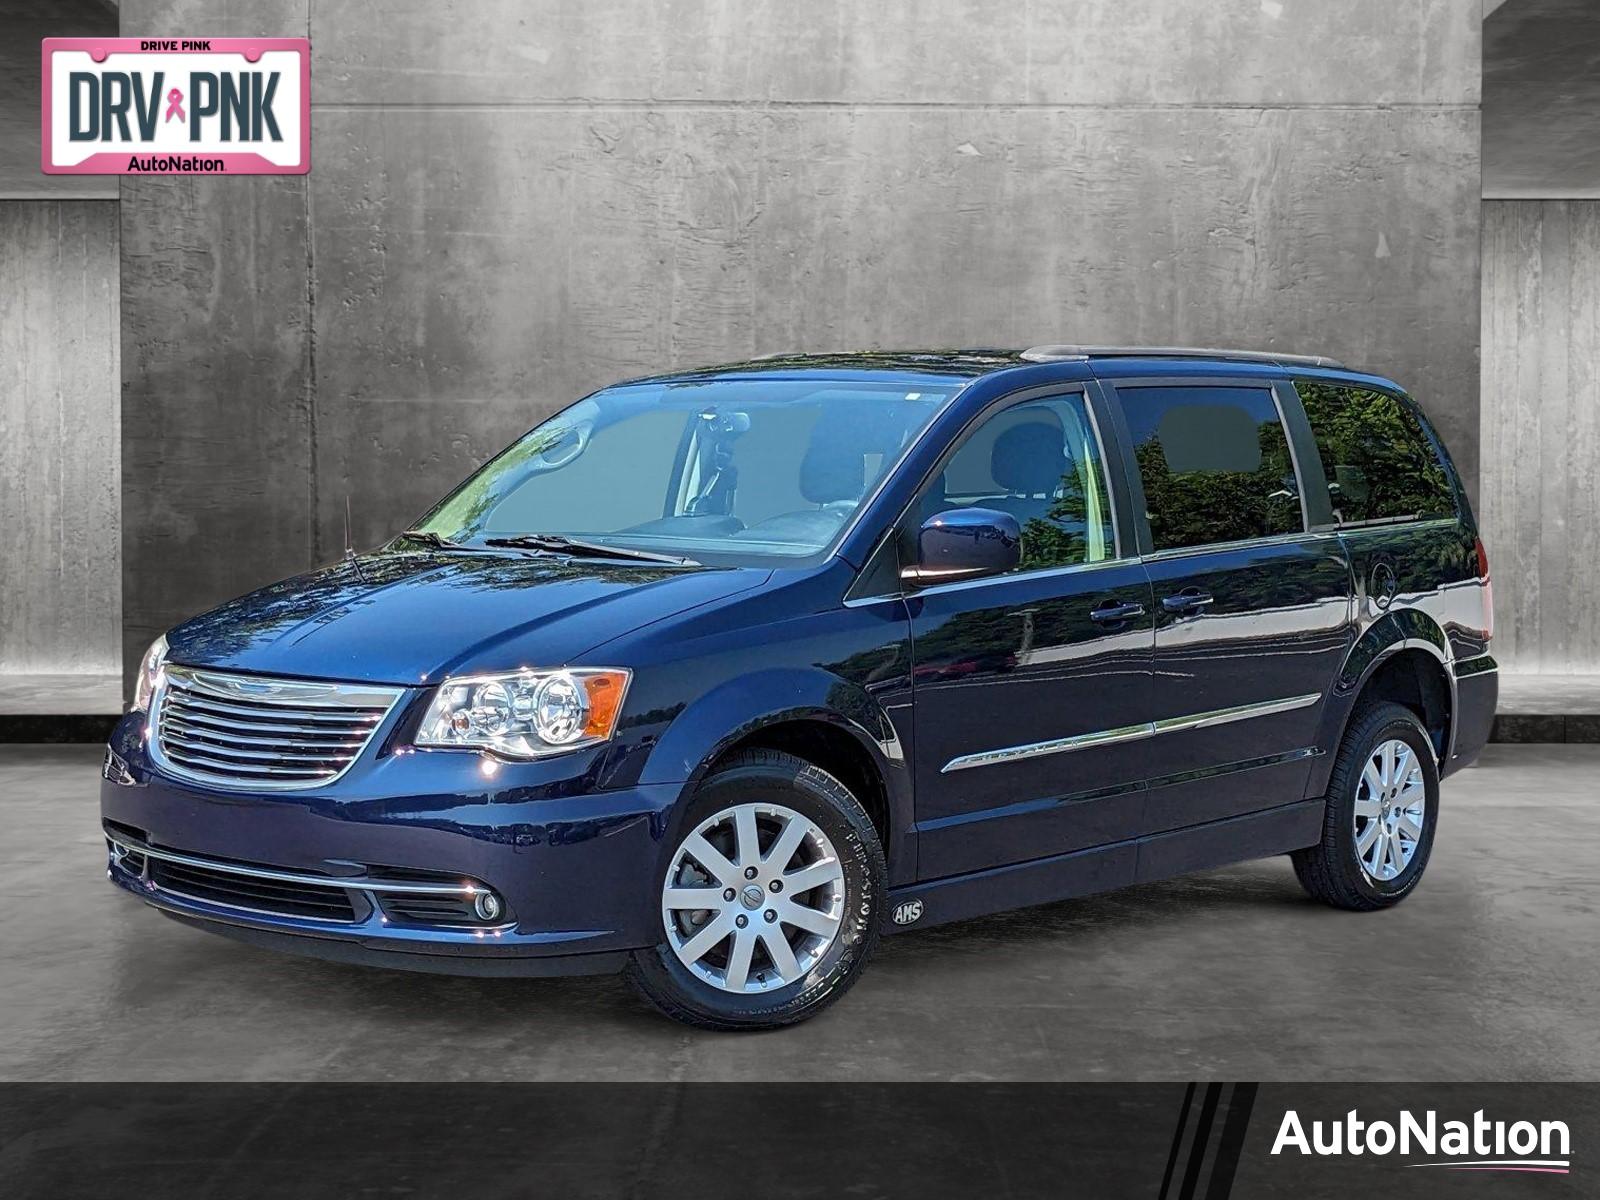 2014 Chrysler Town & Country Vehicle Photo in Sanford, FL 32771